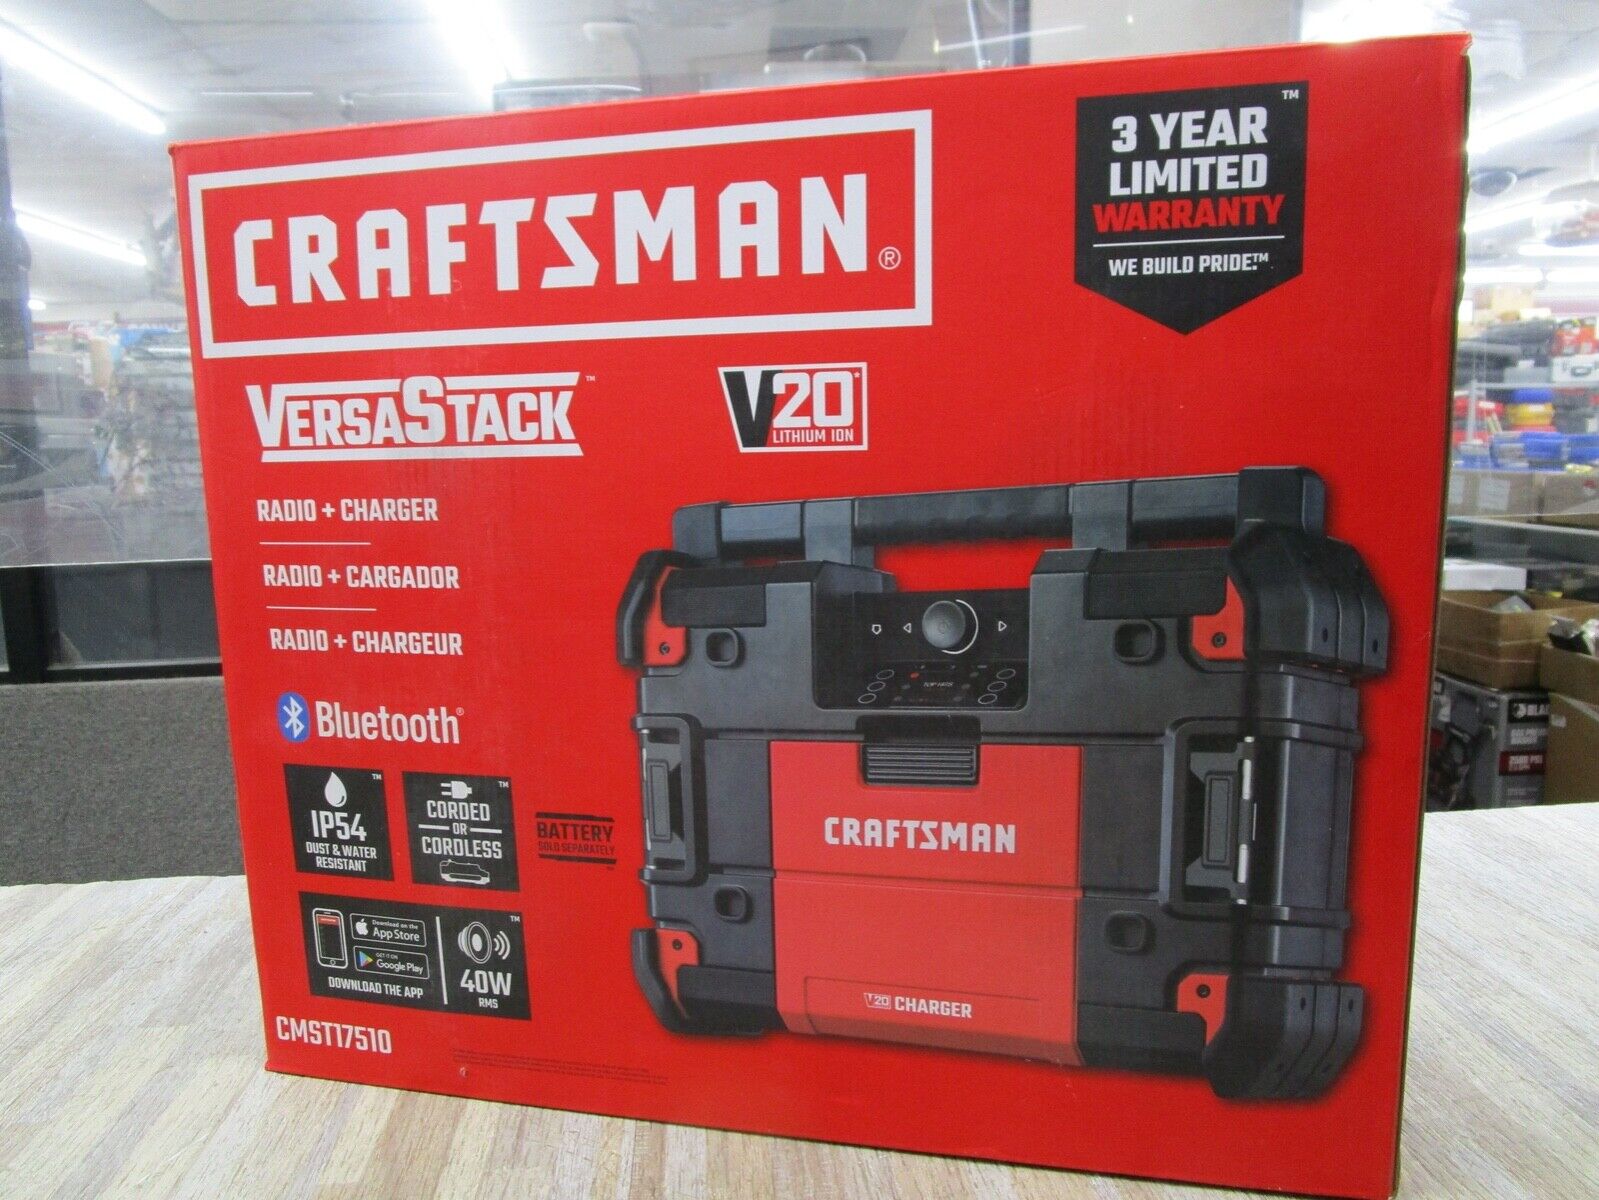 Crafstman Cmst17510 Versa Stack Radio And Charger With Blue Tooth Corded